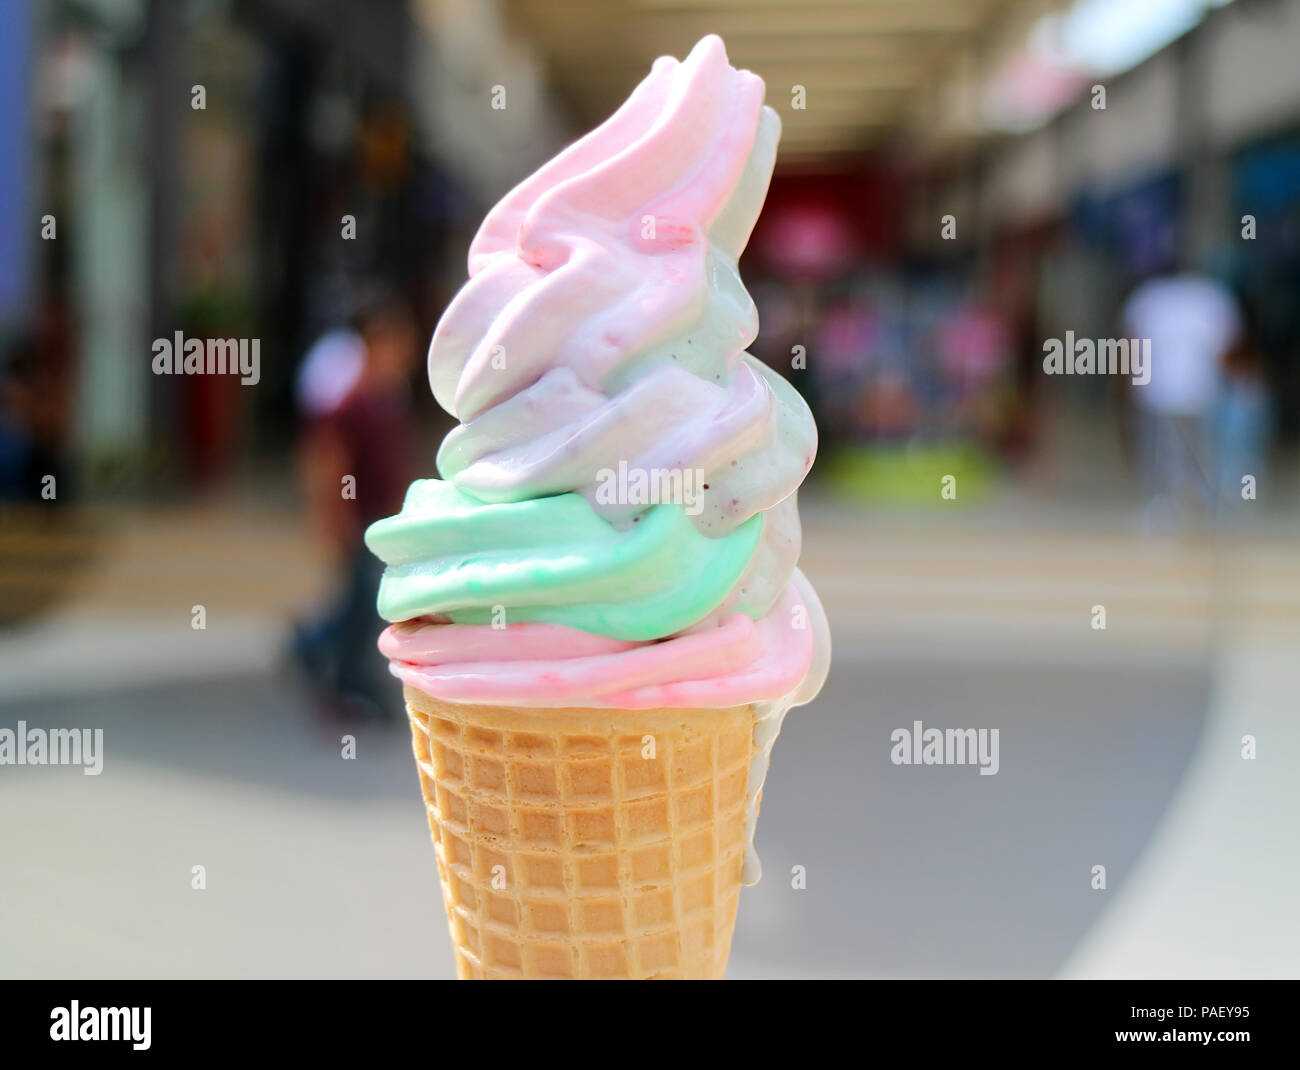 Melting Pastel Color Soft Serve Ice Cream Cone with Blurred Shopping Arcade in Background Stock Photo